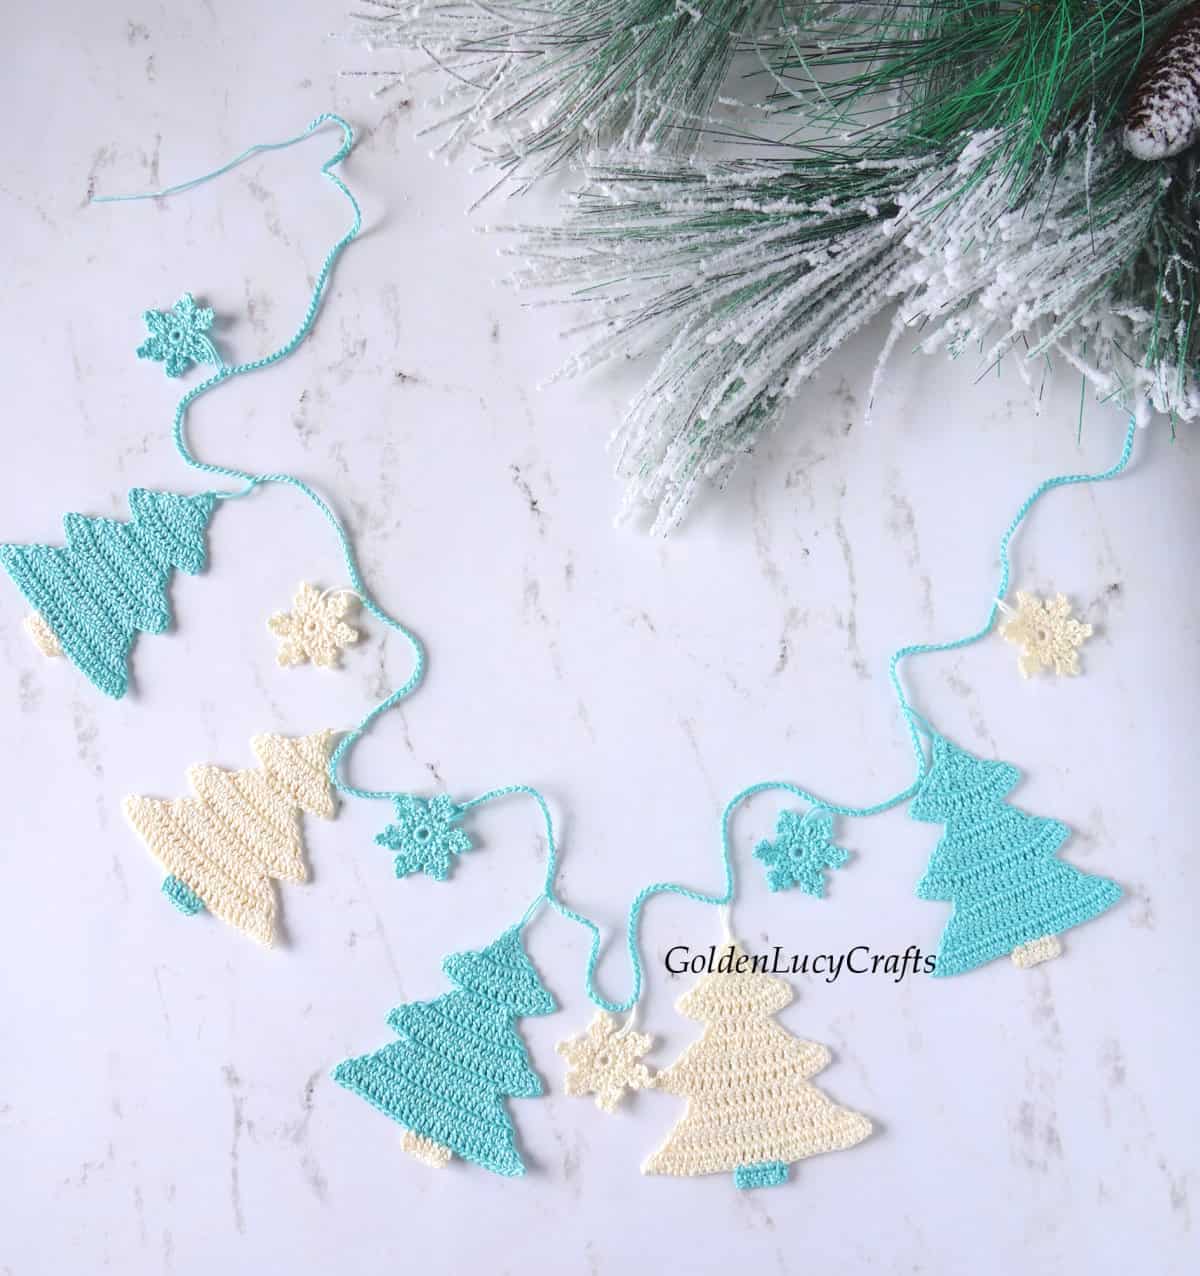 Crochet Christmas tree garland in turquoise and cream colors laying flat on the table